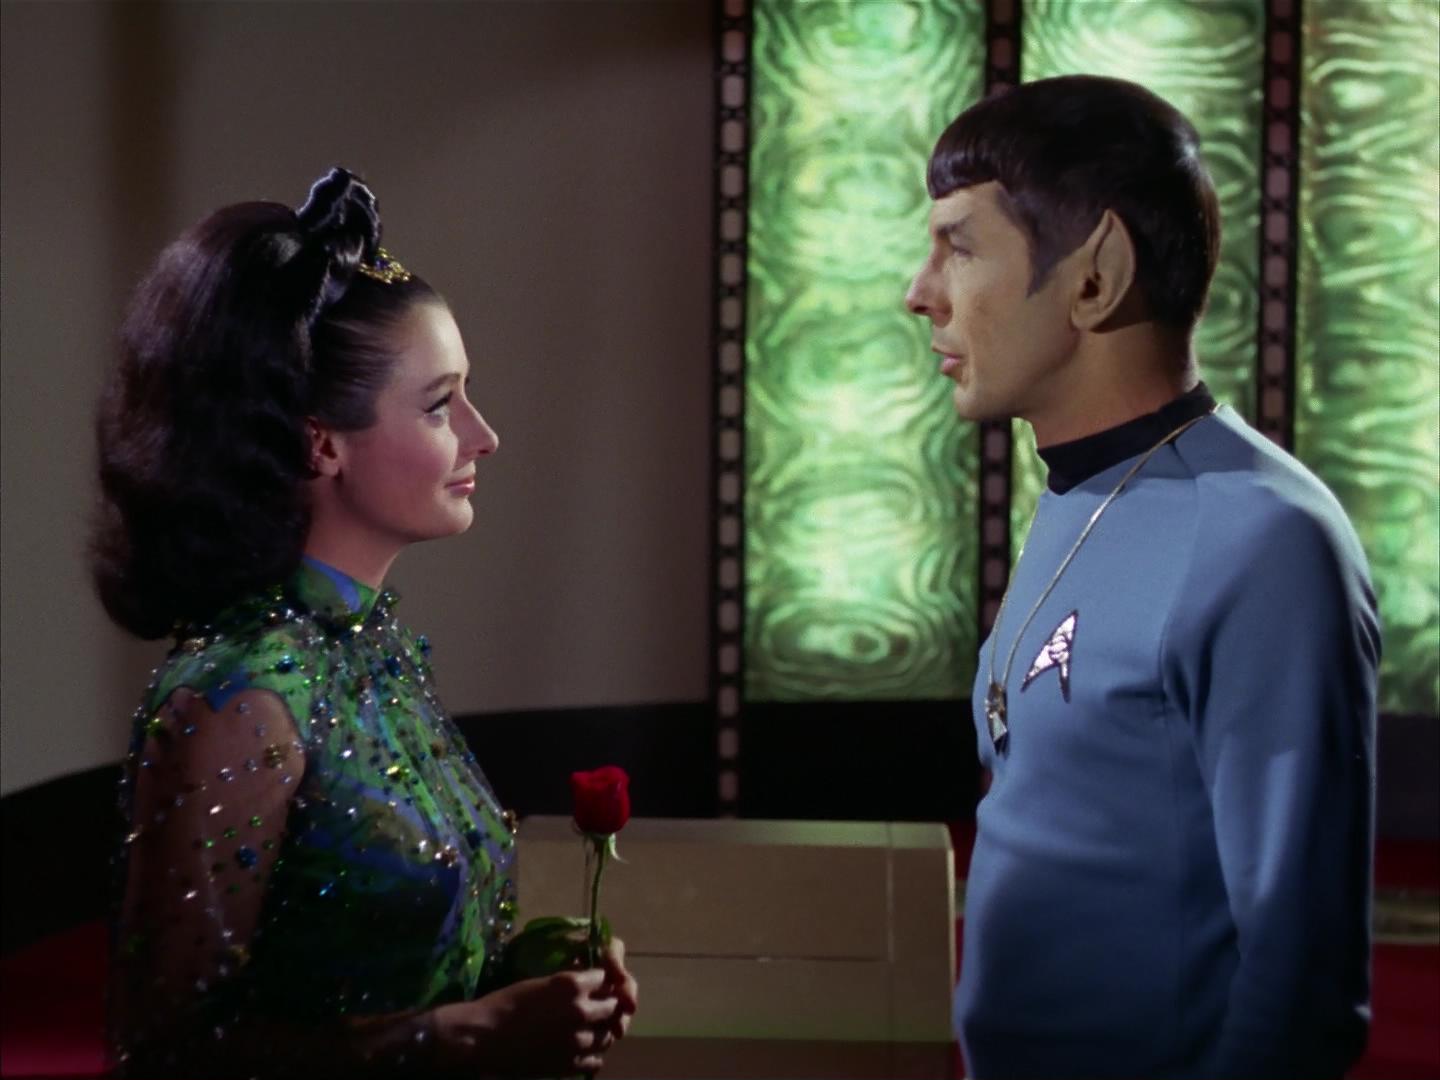 Star Trek: The Original Series 'Is There in Truth No Beauty?'